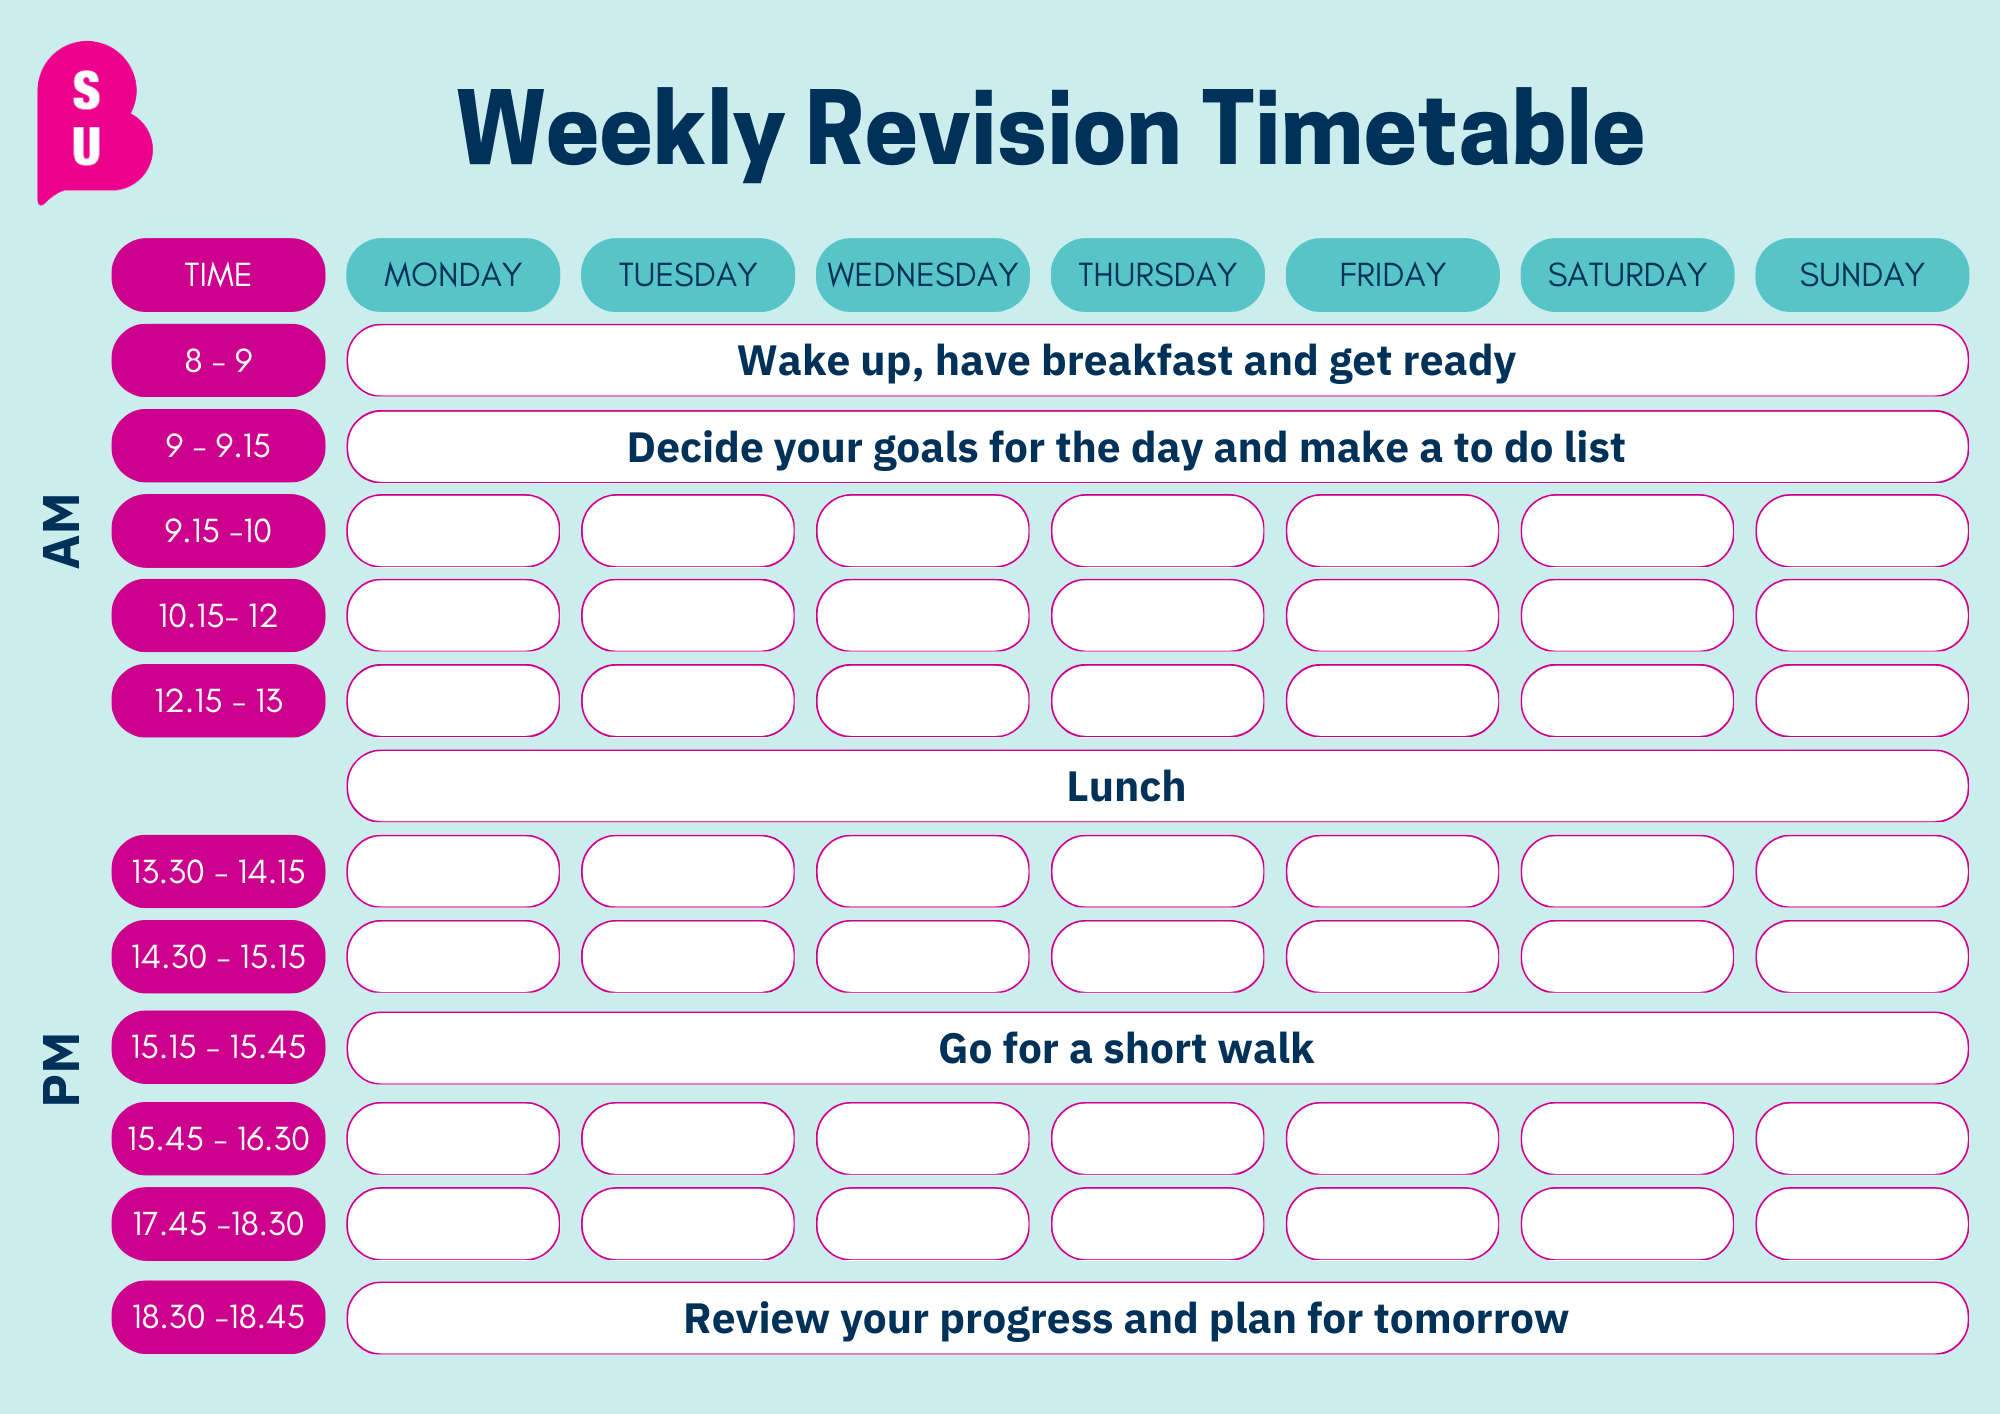 Image of a weekly revision timetable, with a light blue background and including hours and days 